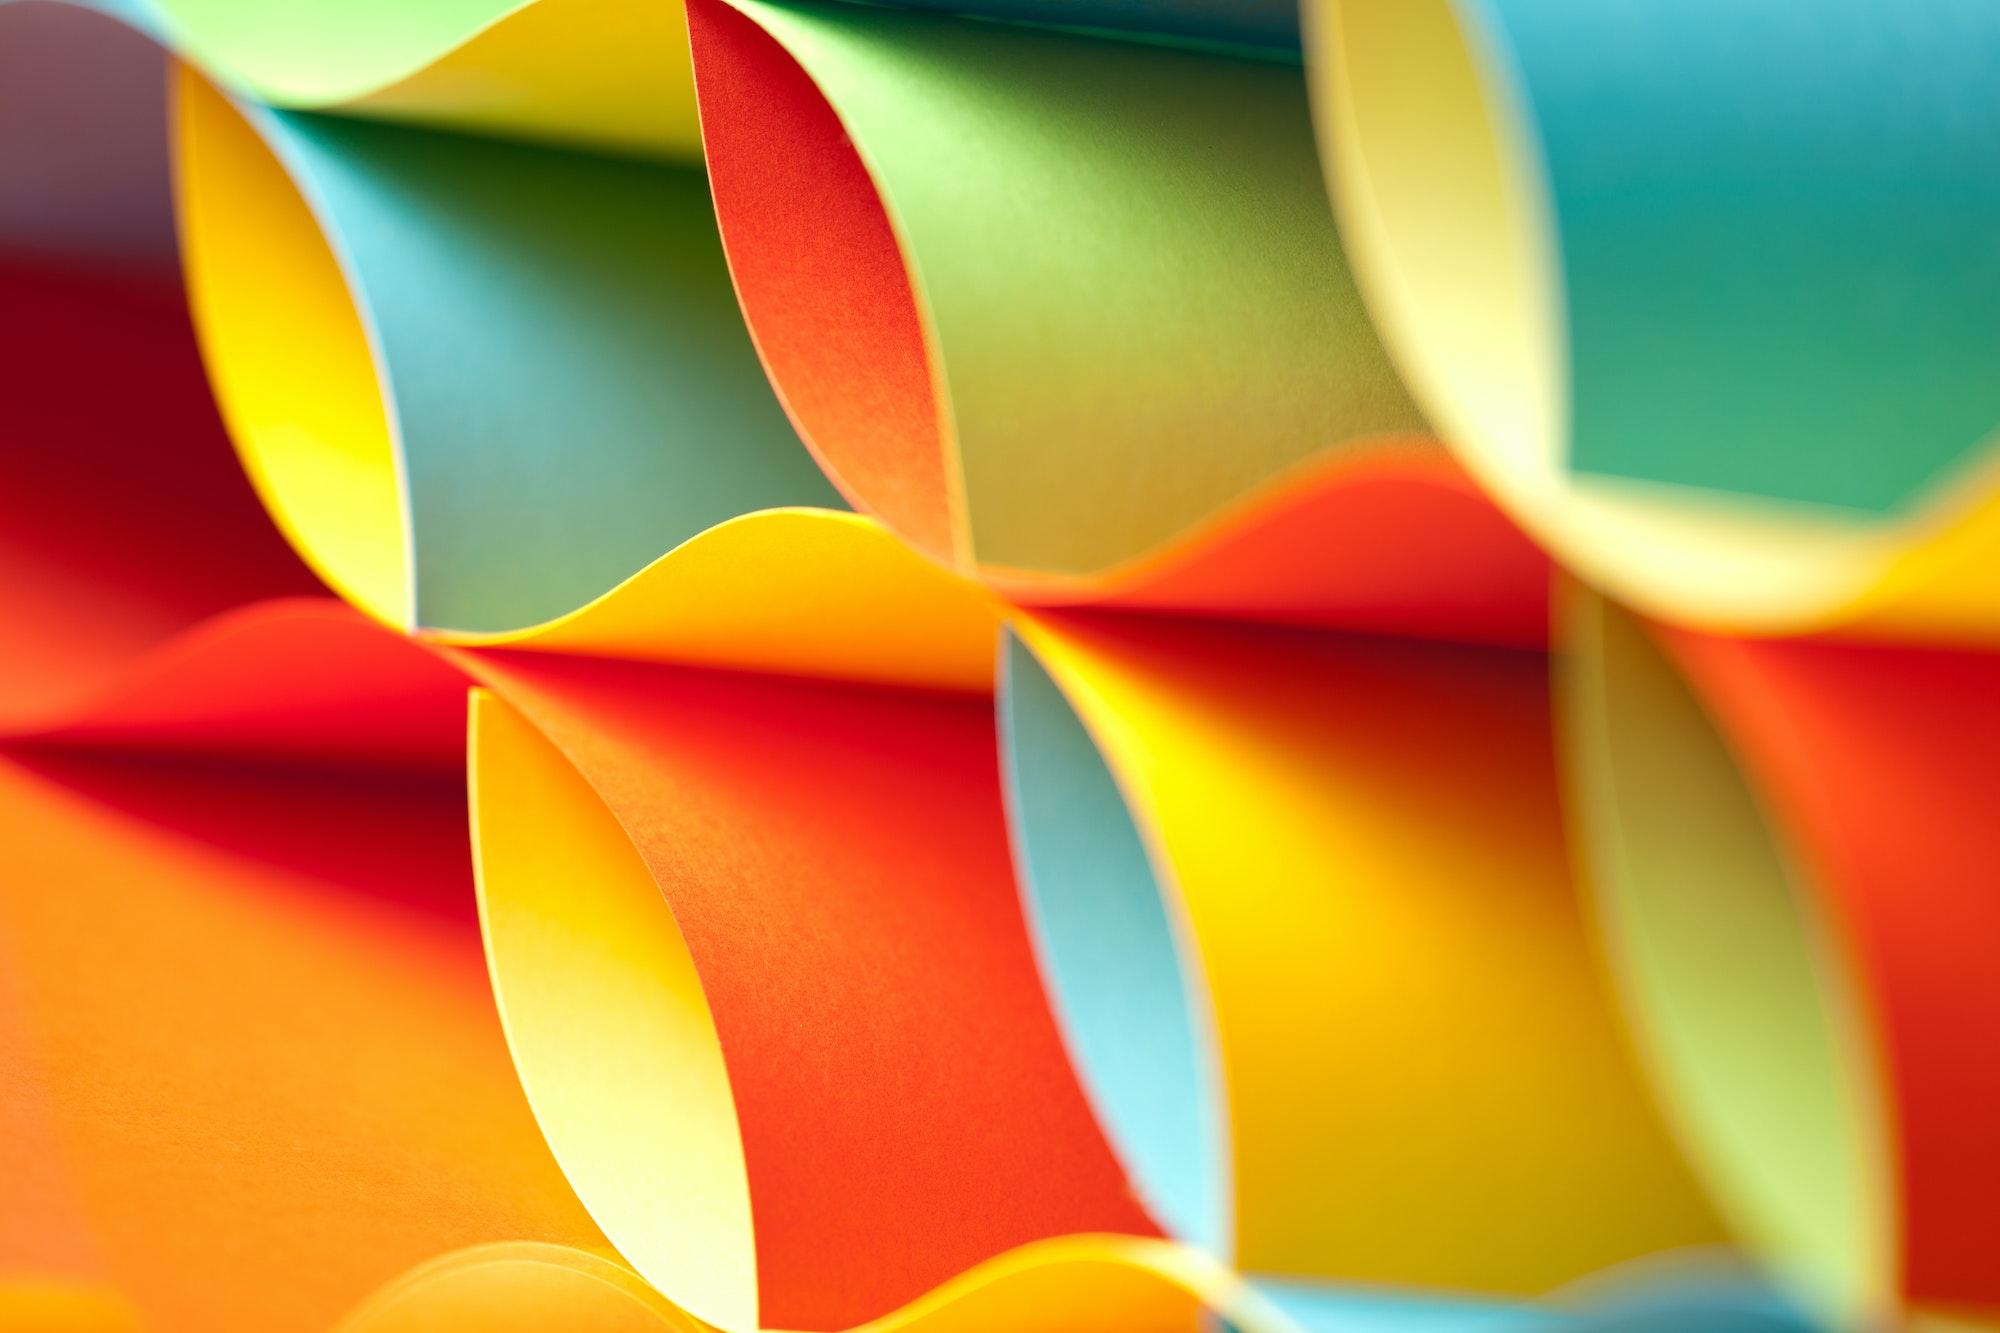 detail of waved colored paper structure